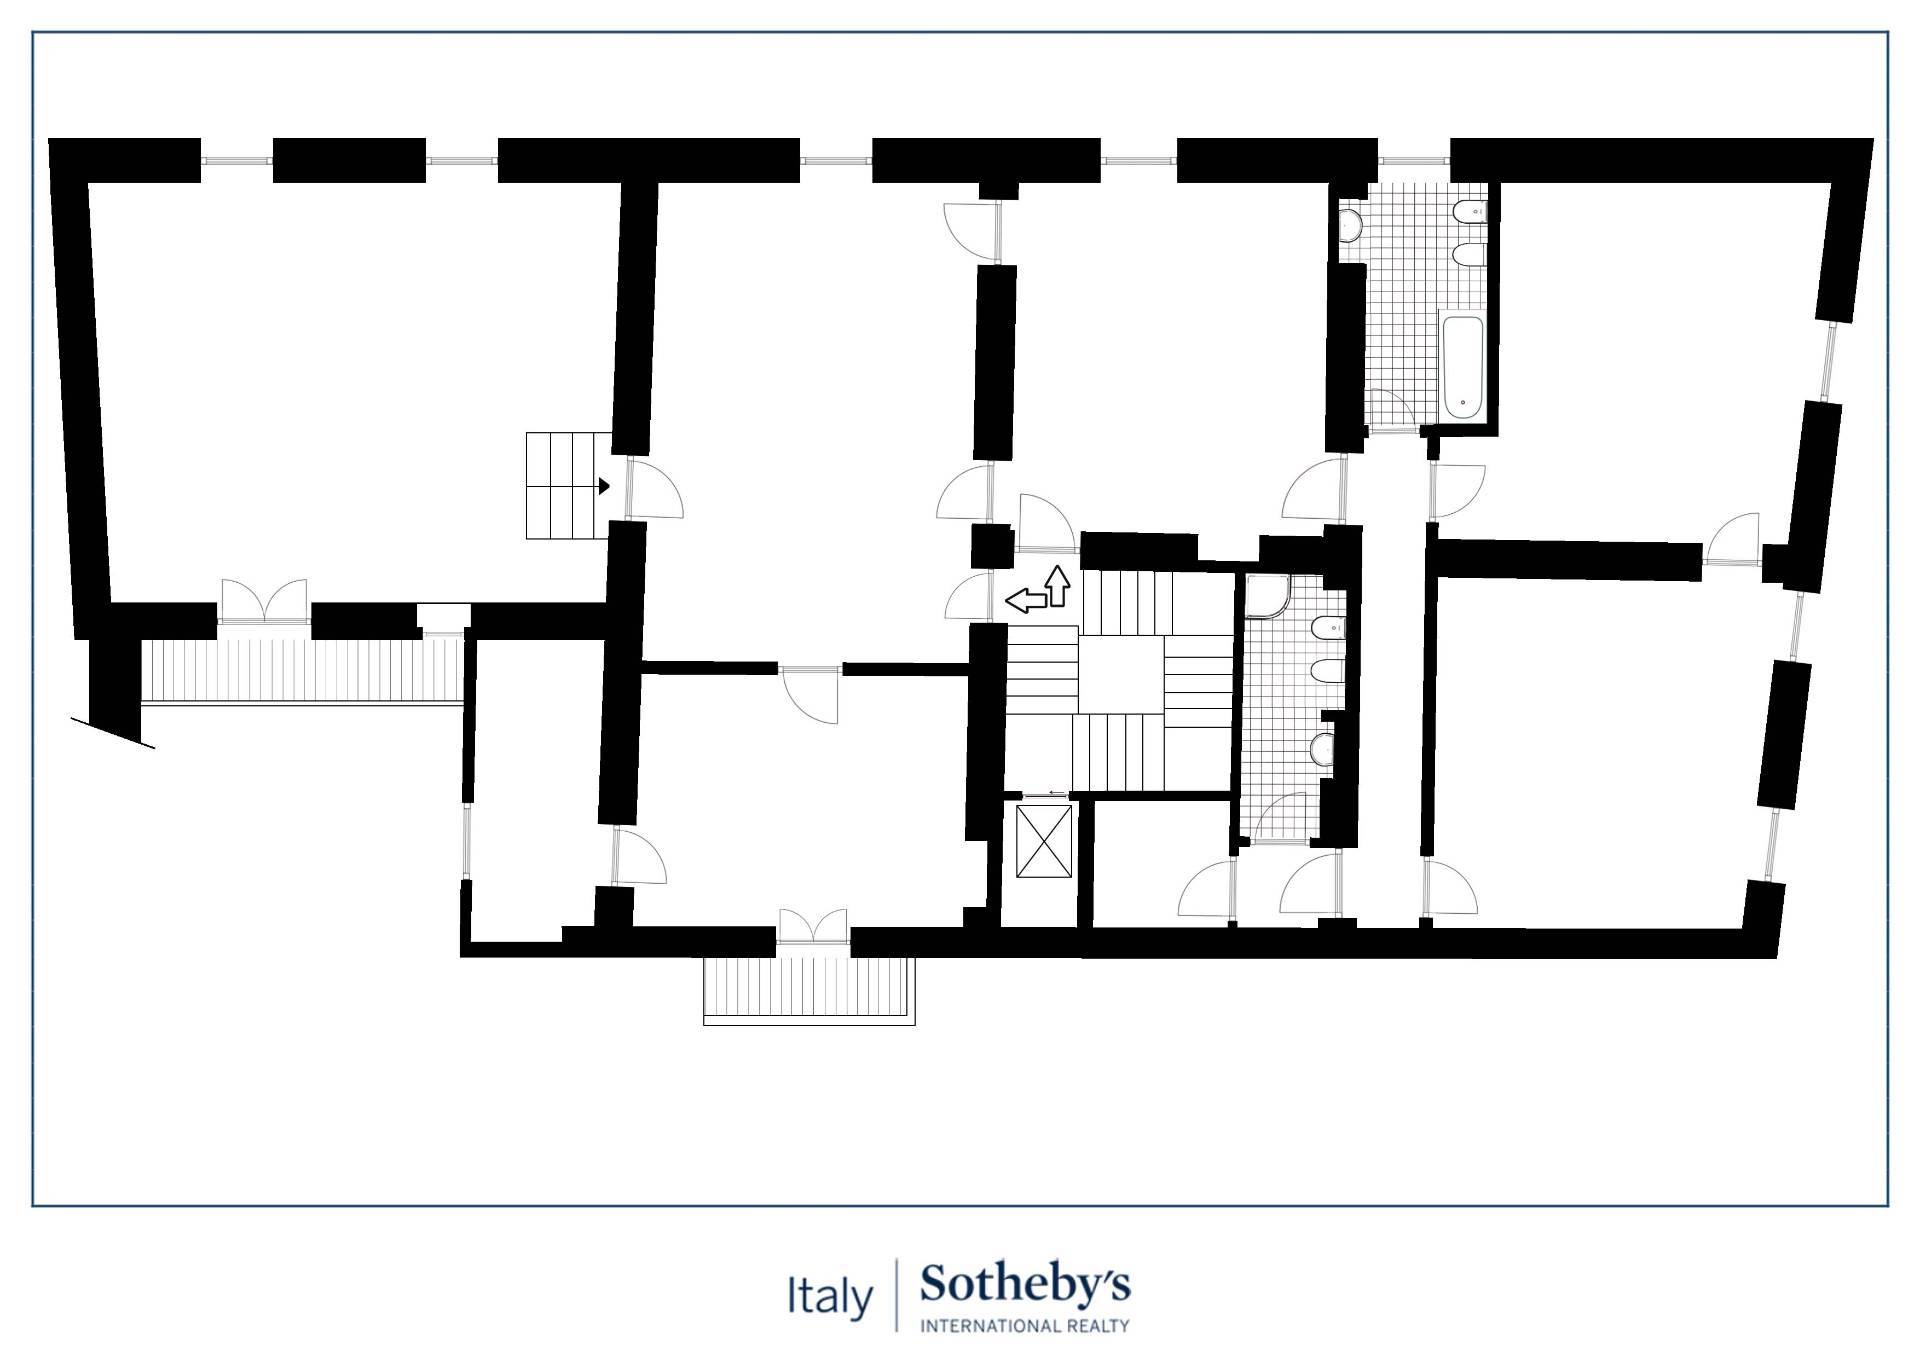 Luxury residential building in Rome city center